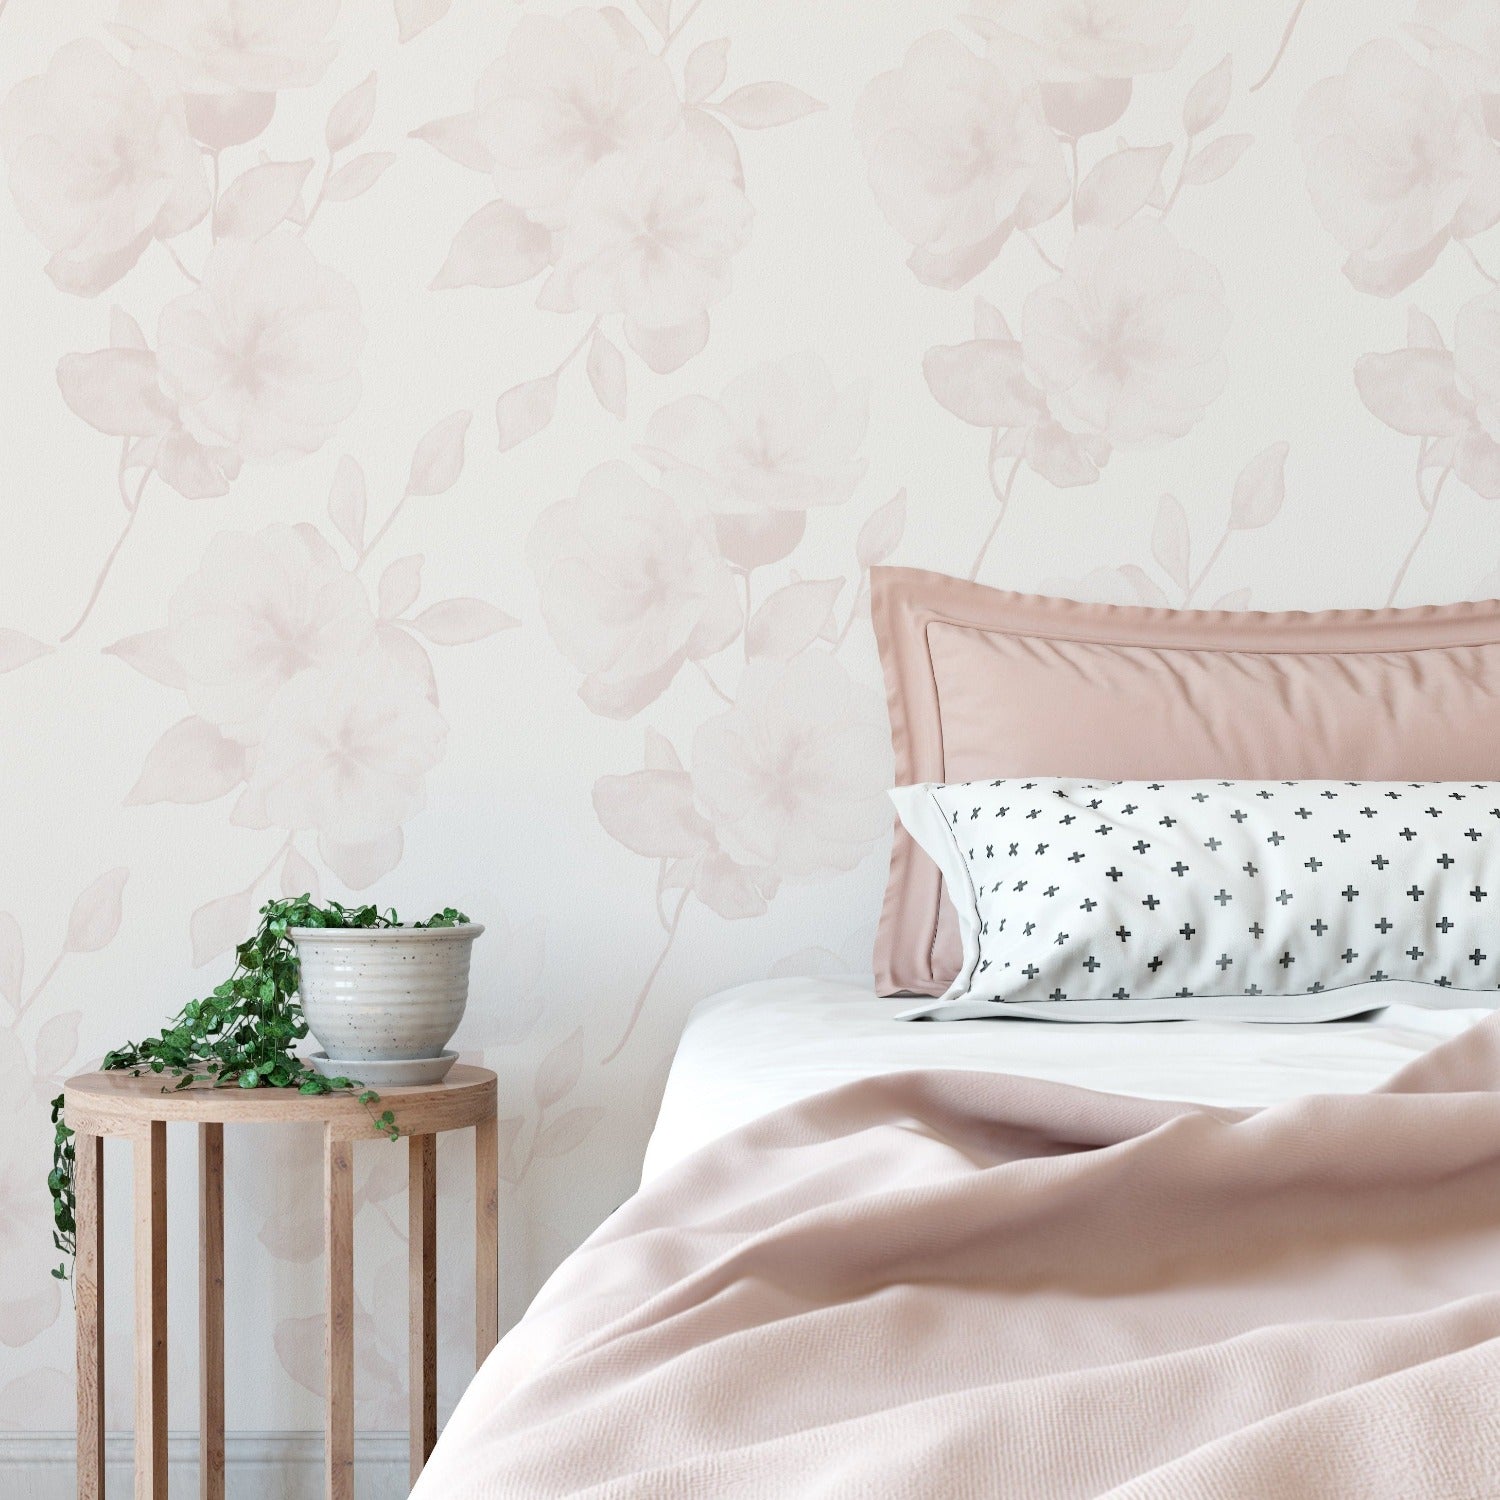 This photo depicts a bedroom interior dressed with the Minimal Floral Wallpaper V on the wall. The wallpaper adds a subtle, elegant touch with its watercolor blush flowers complementing the pastel bedding and wooden bedside table.